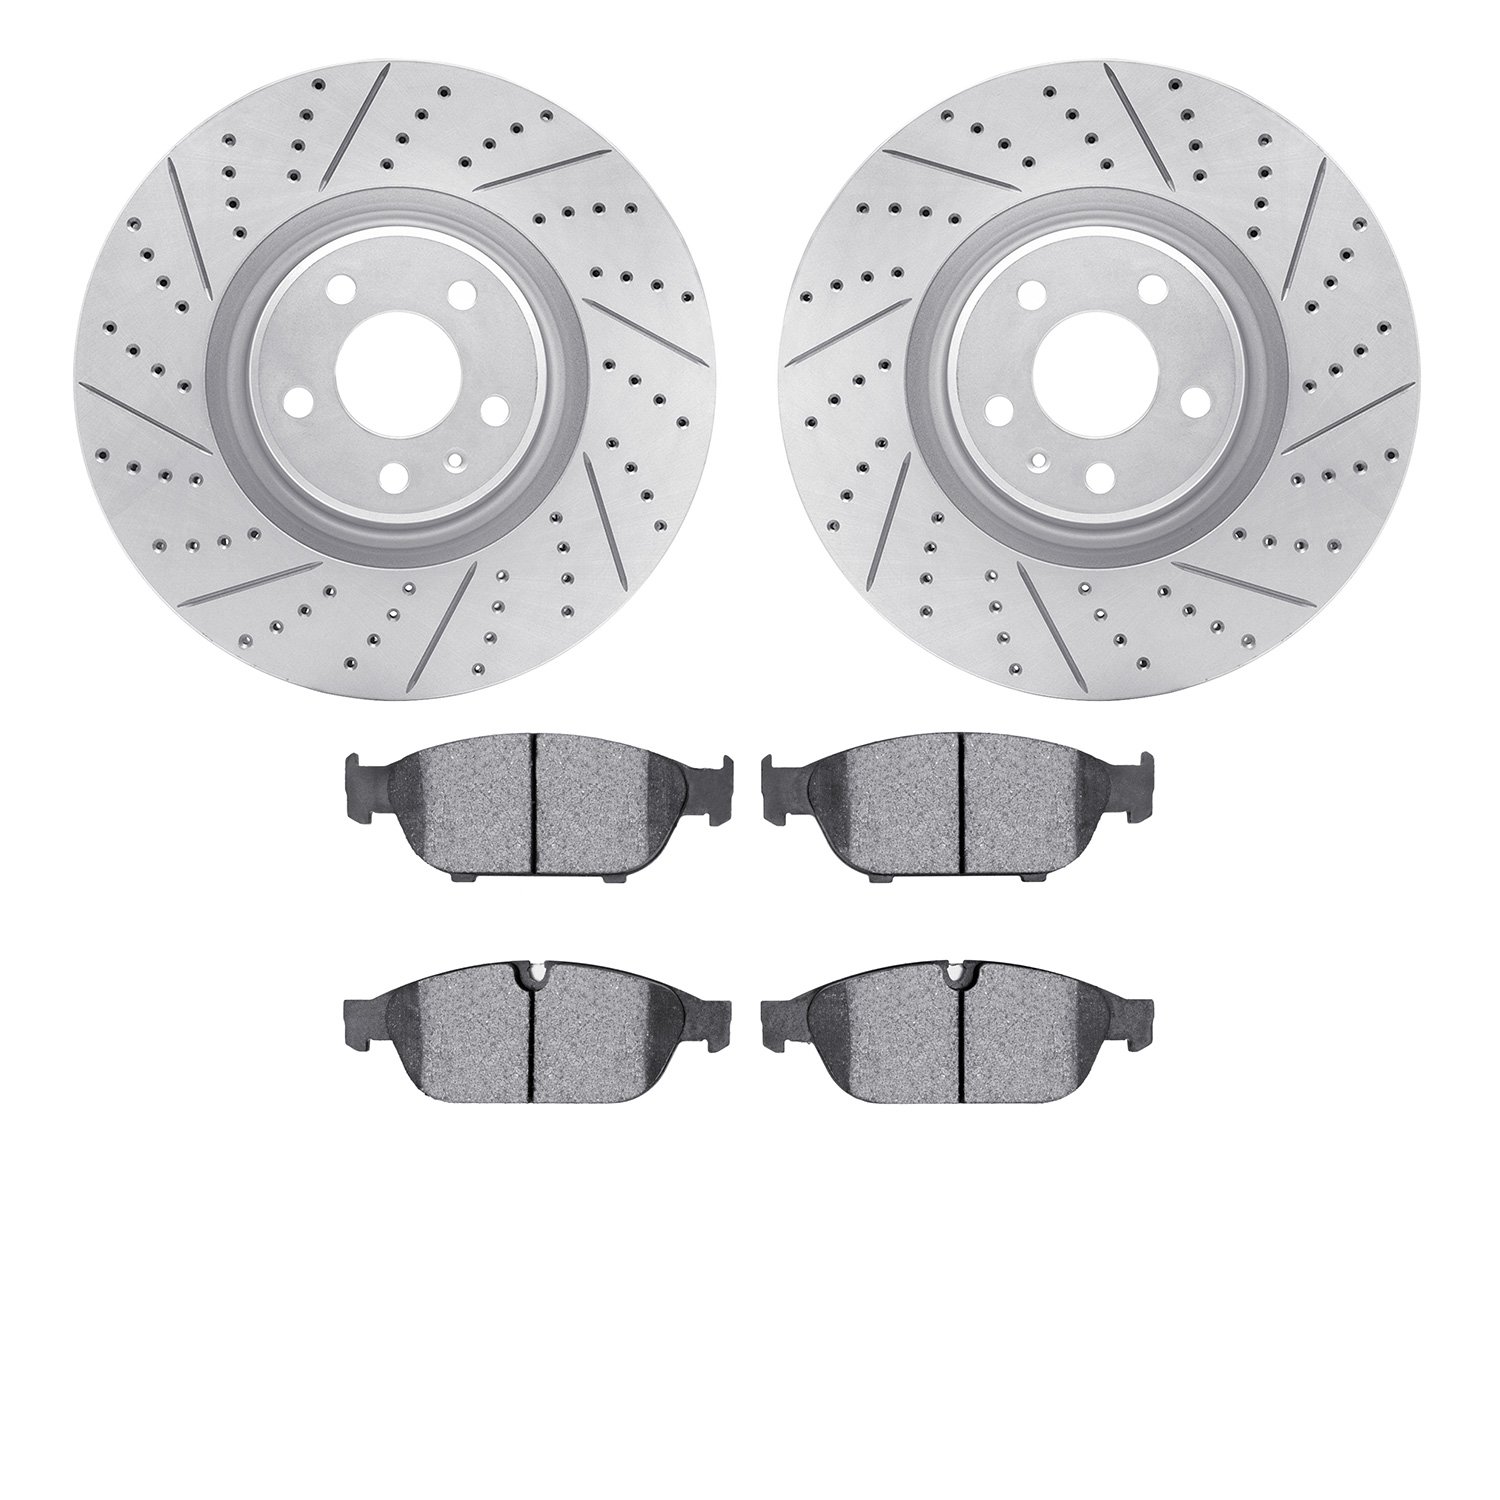 2502-73063 Geoperformance Drilled/Slotted Rotors w/5000 Advanced Brake Pads Kit, 2012-2014 Audi/Volkswagen, Position: Front